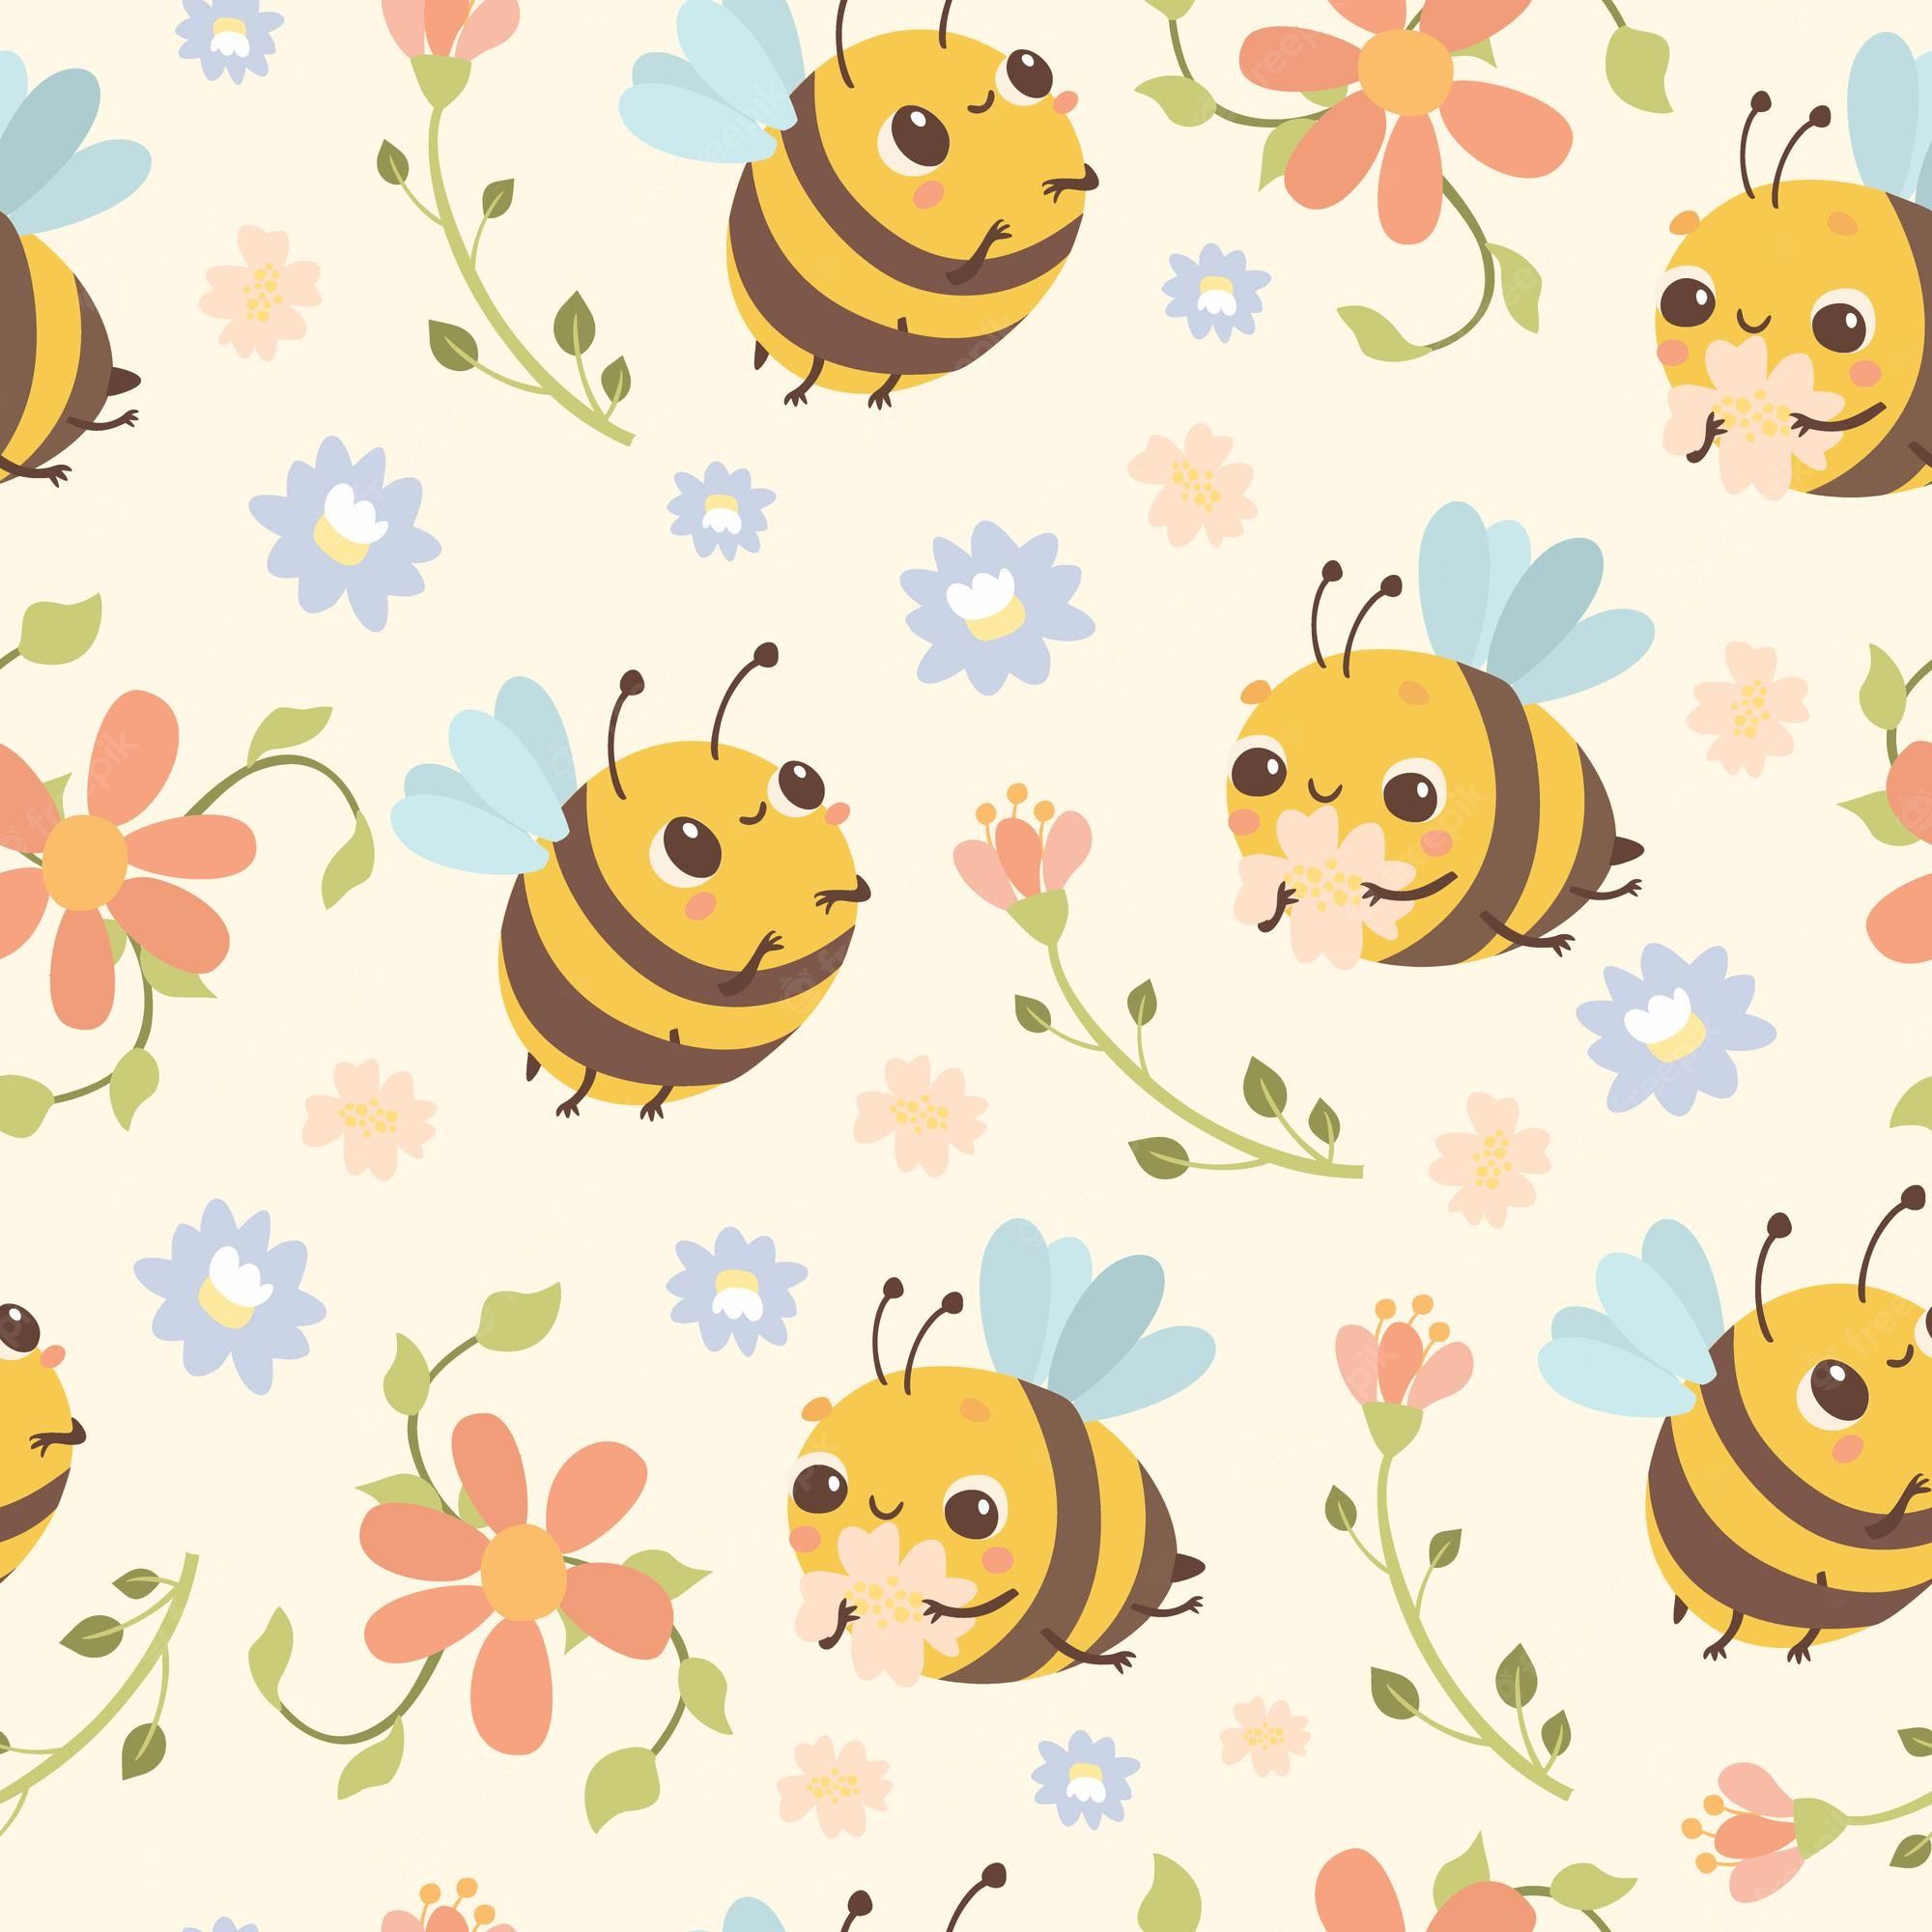 A cute bee pattern with flowers and leaves - Bee